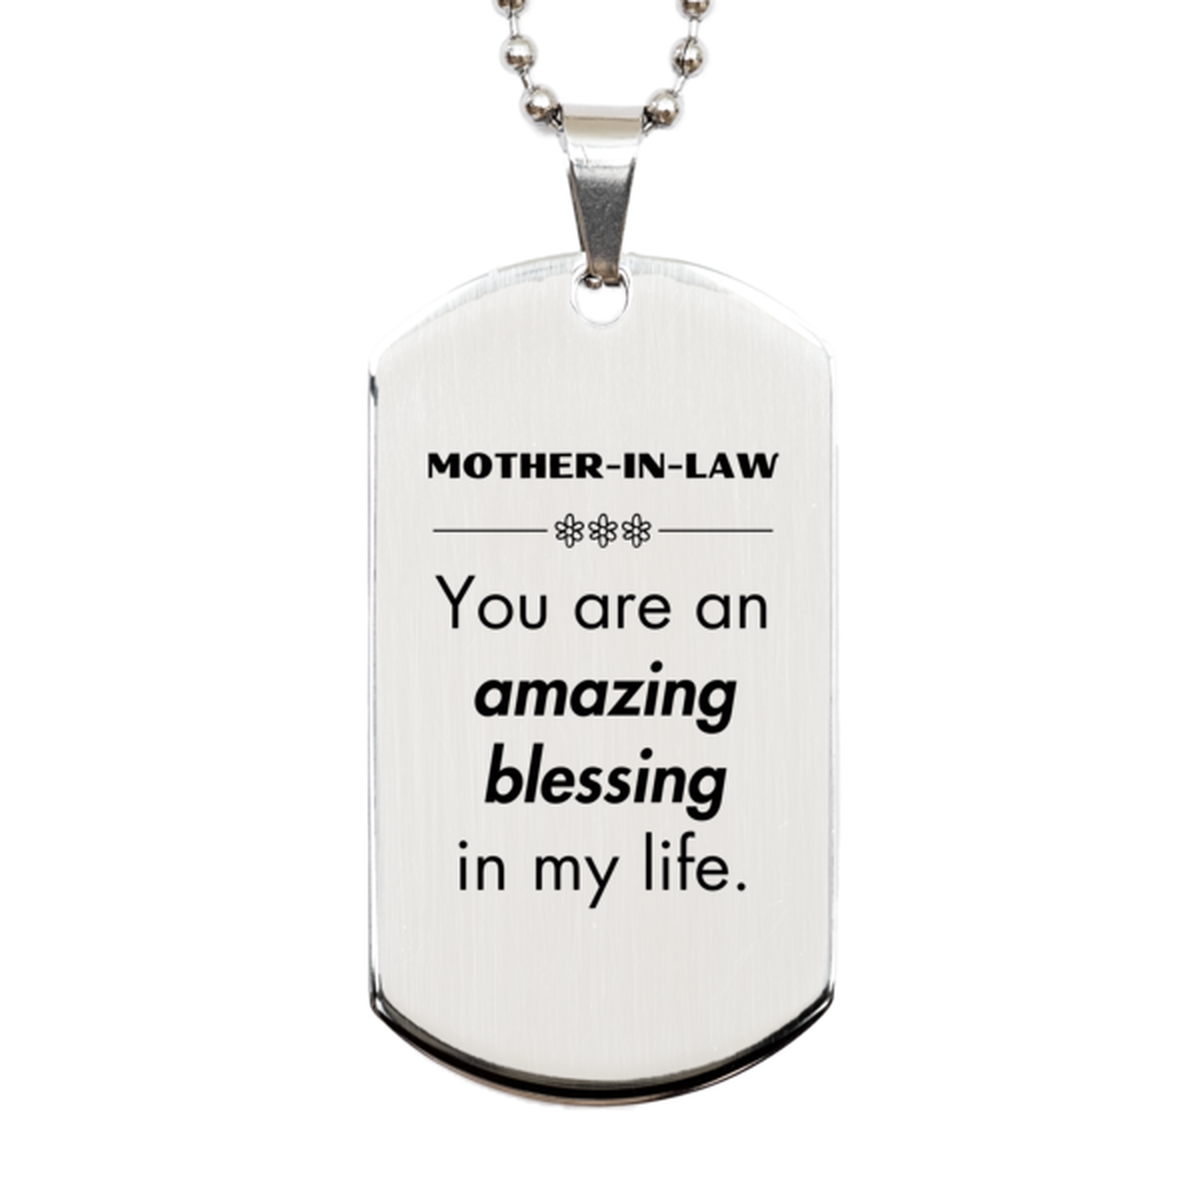 Mother-In-Law Silver Dog Tag, You are an amazing blessing in my life, Thank You Gifts For Mother-In-Law, Inspirational Birthday Christmas Unique Gifts For Mother-In-Law